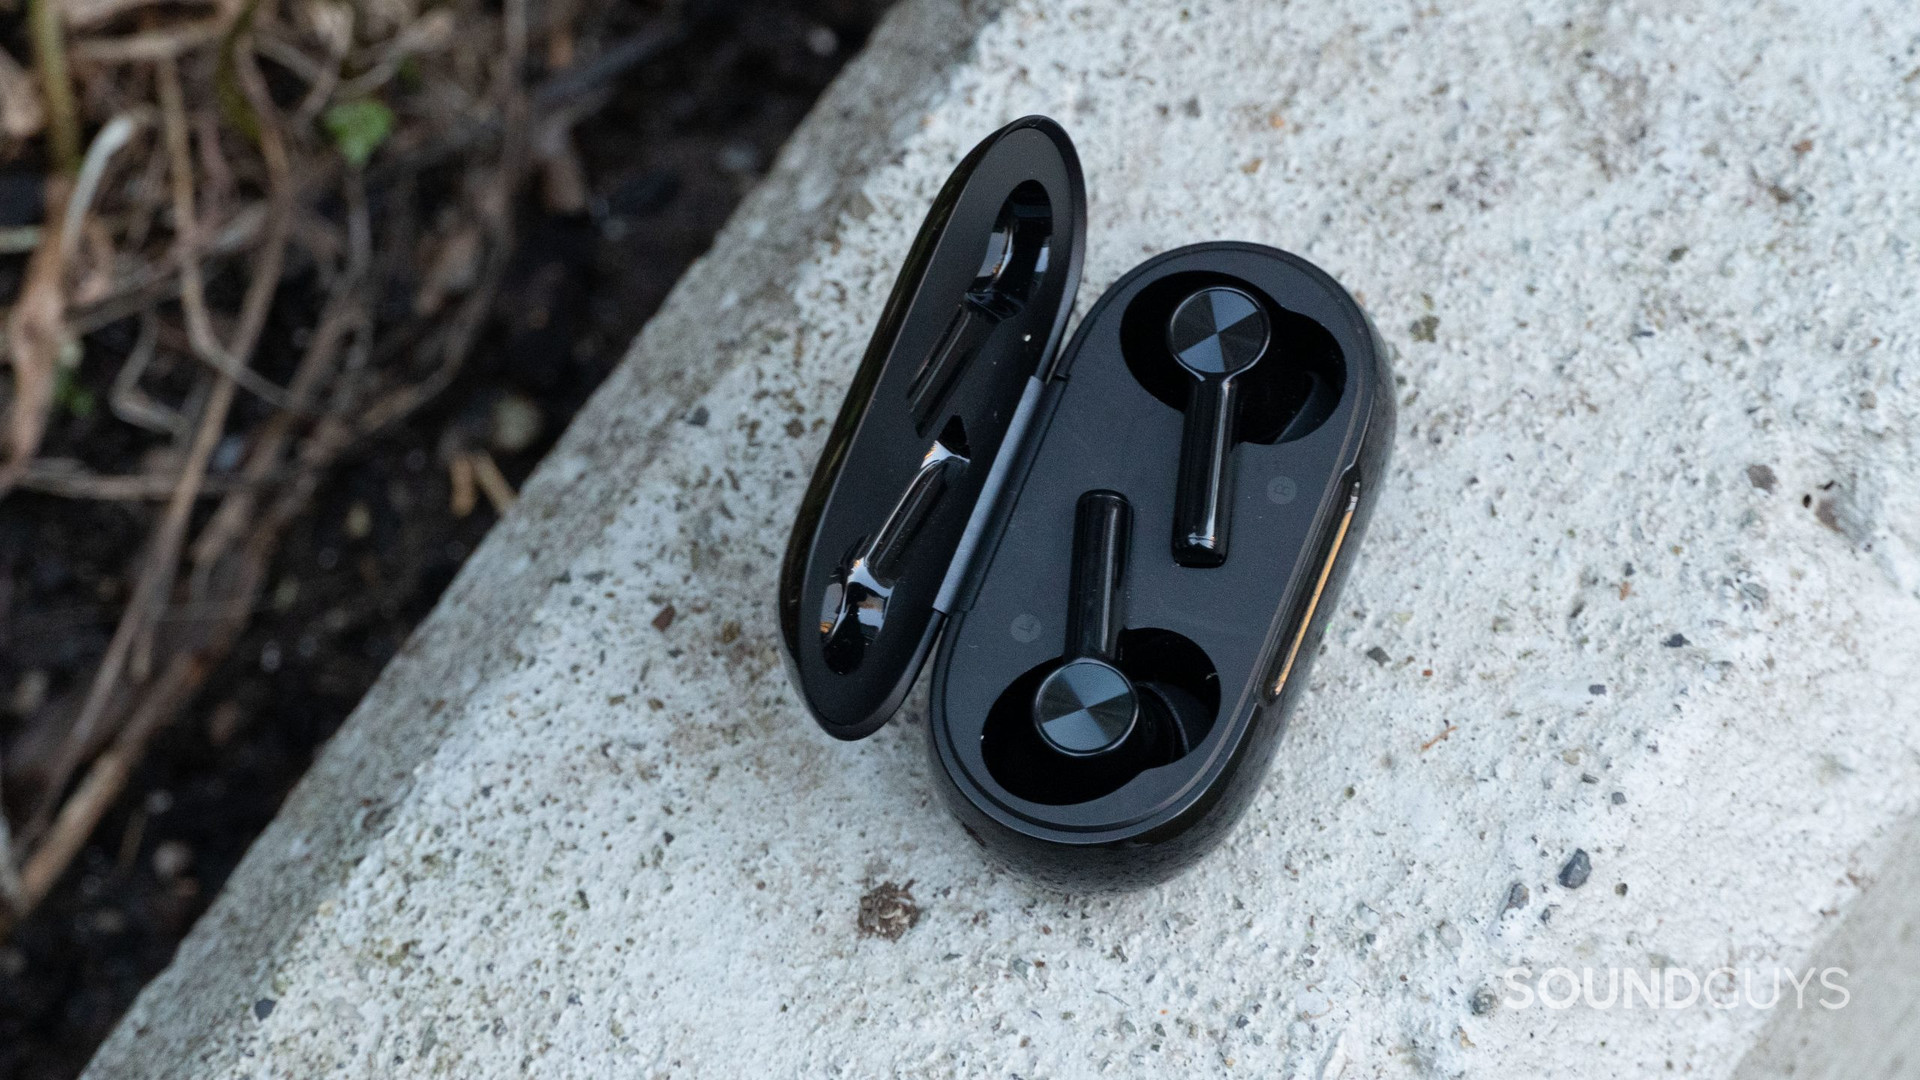 OnePlus Buds Z2 case sits open on a ledge, revealing the earbuds inside.